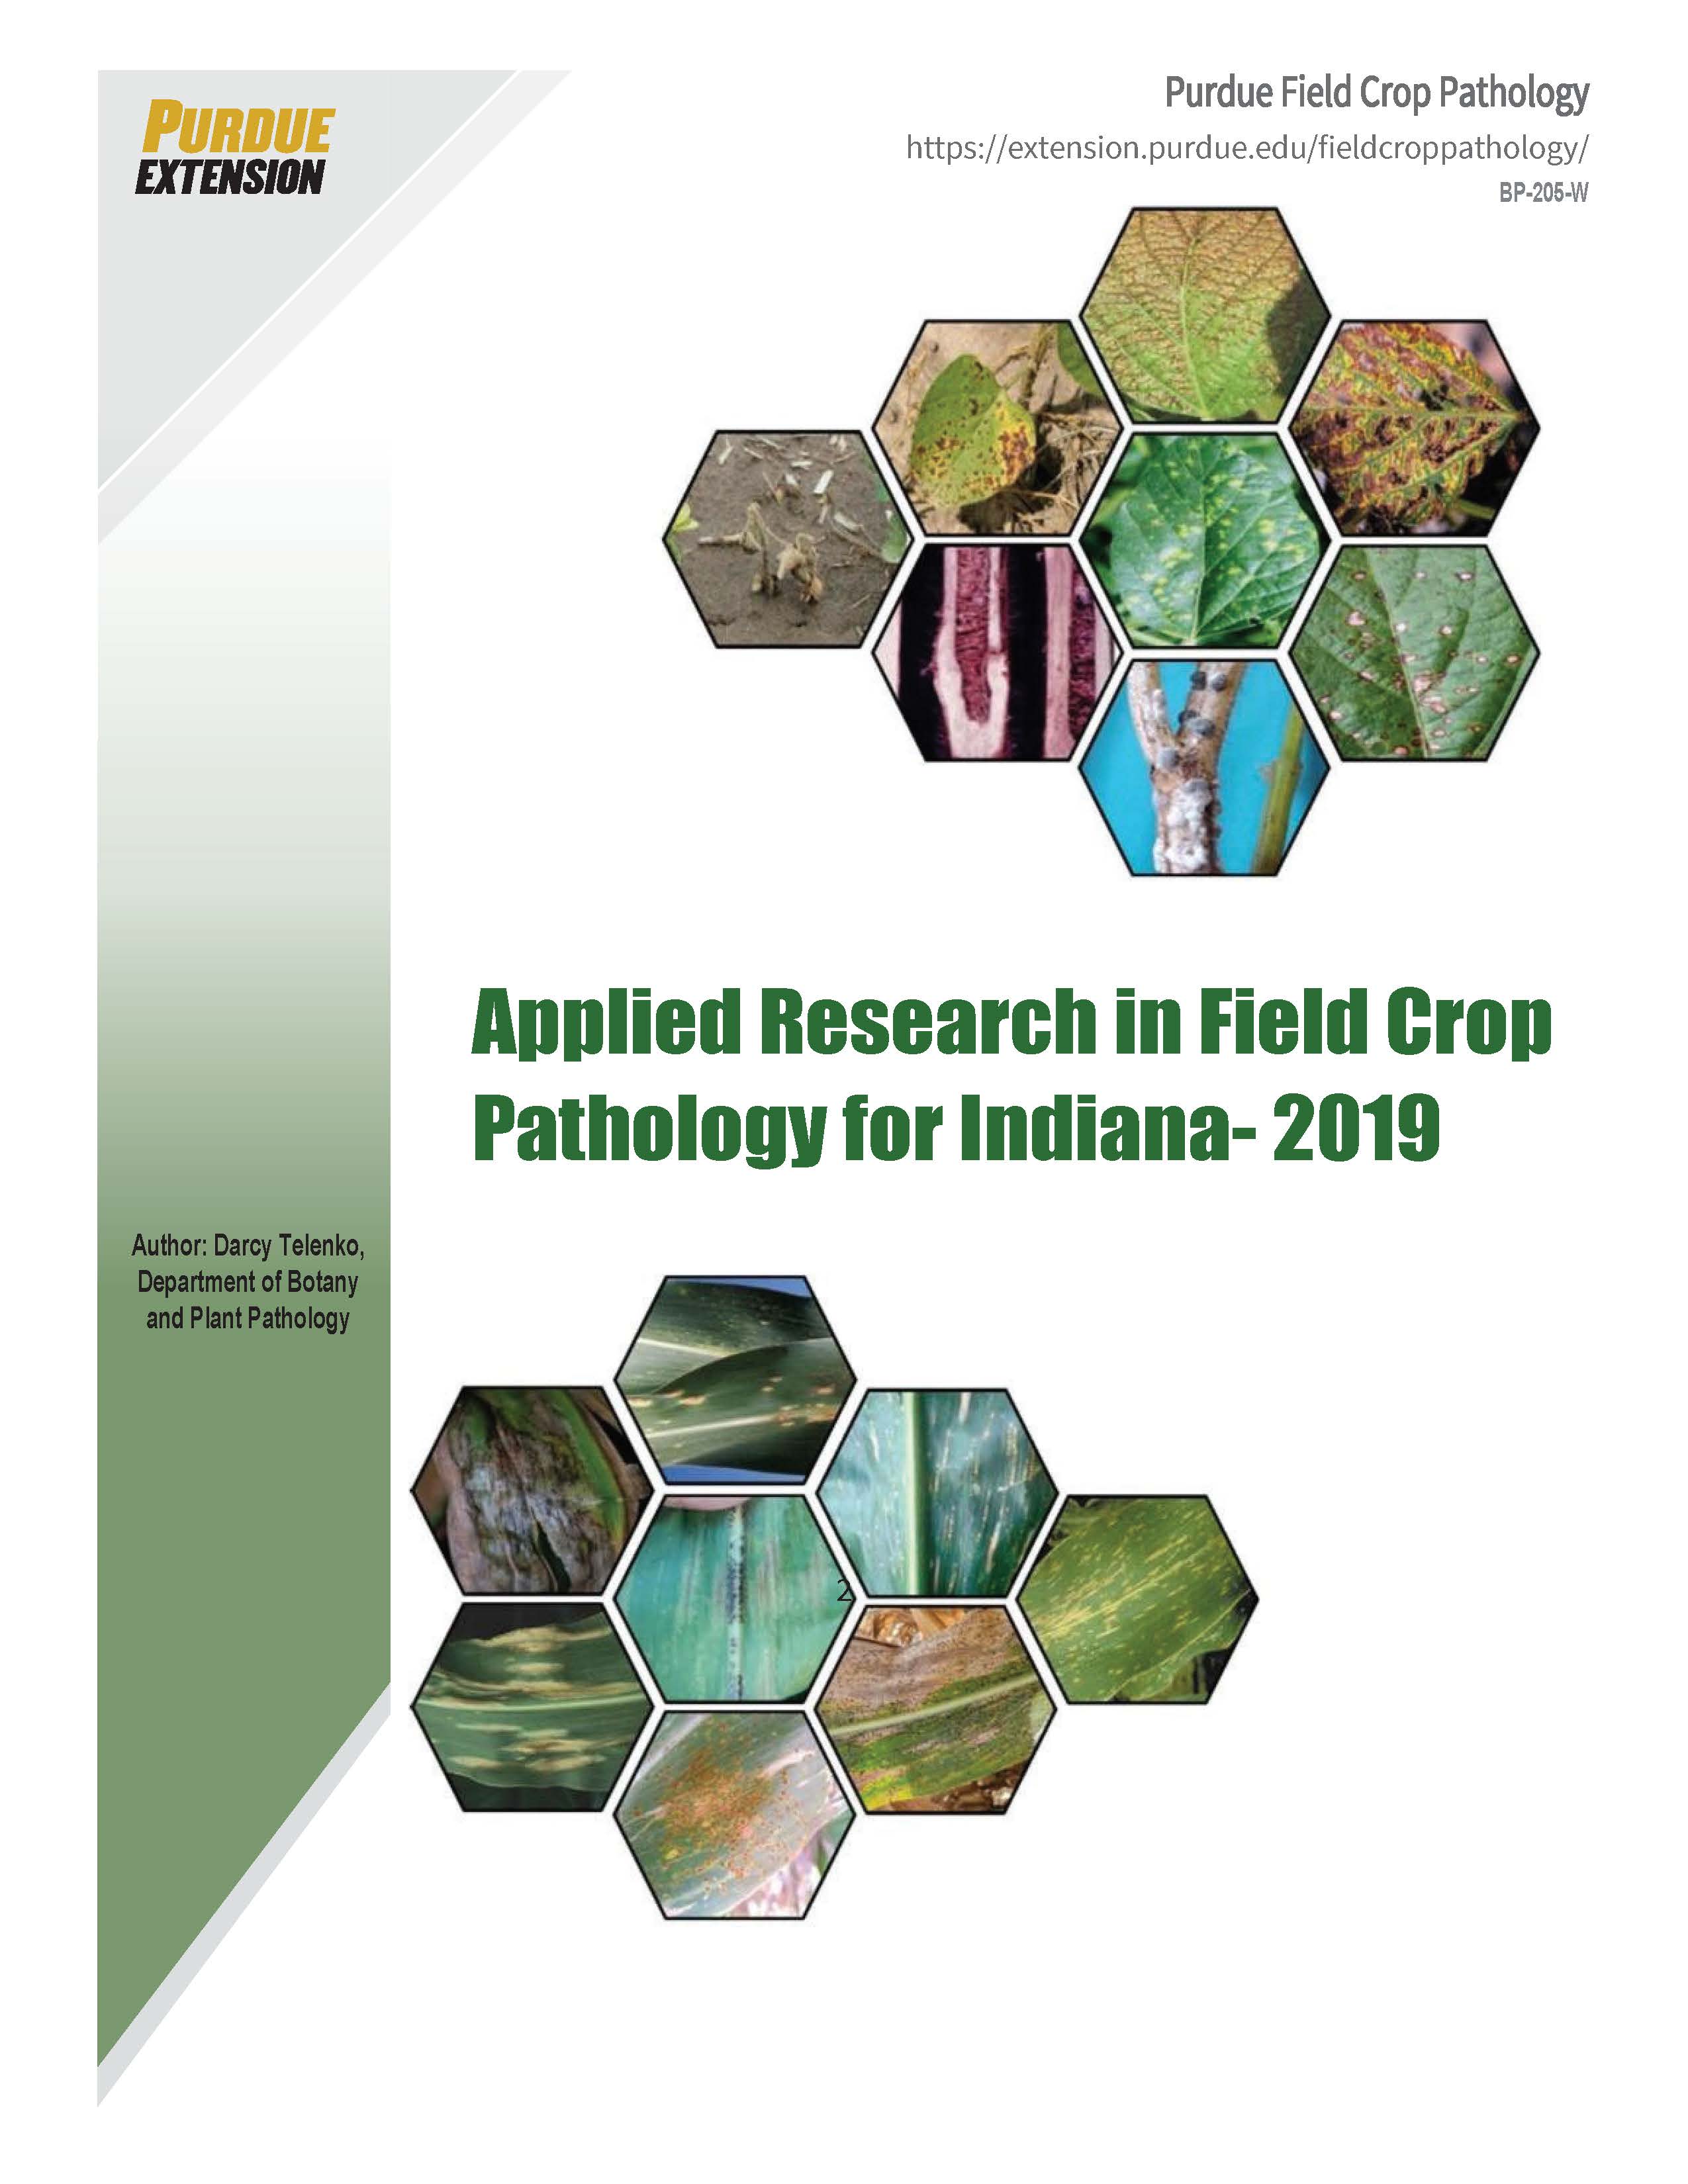 Applied Research in Field Crop Pathology for Indiana - 2019 (PDF)